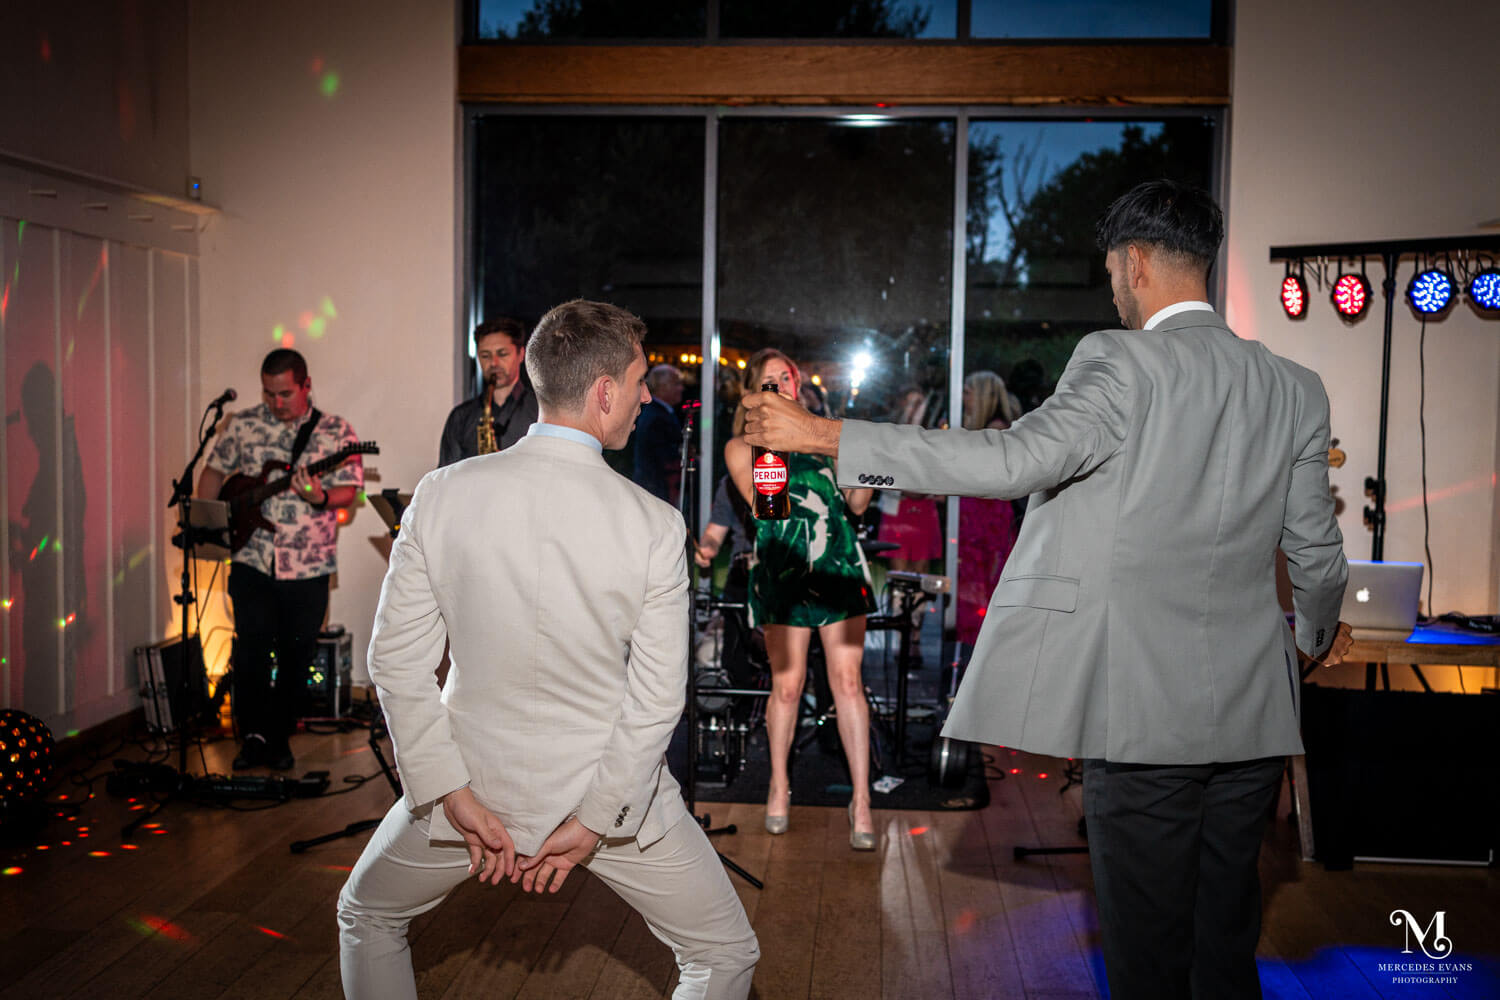 two men dance together, with the wedding band behind them